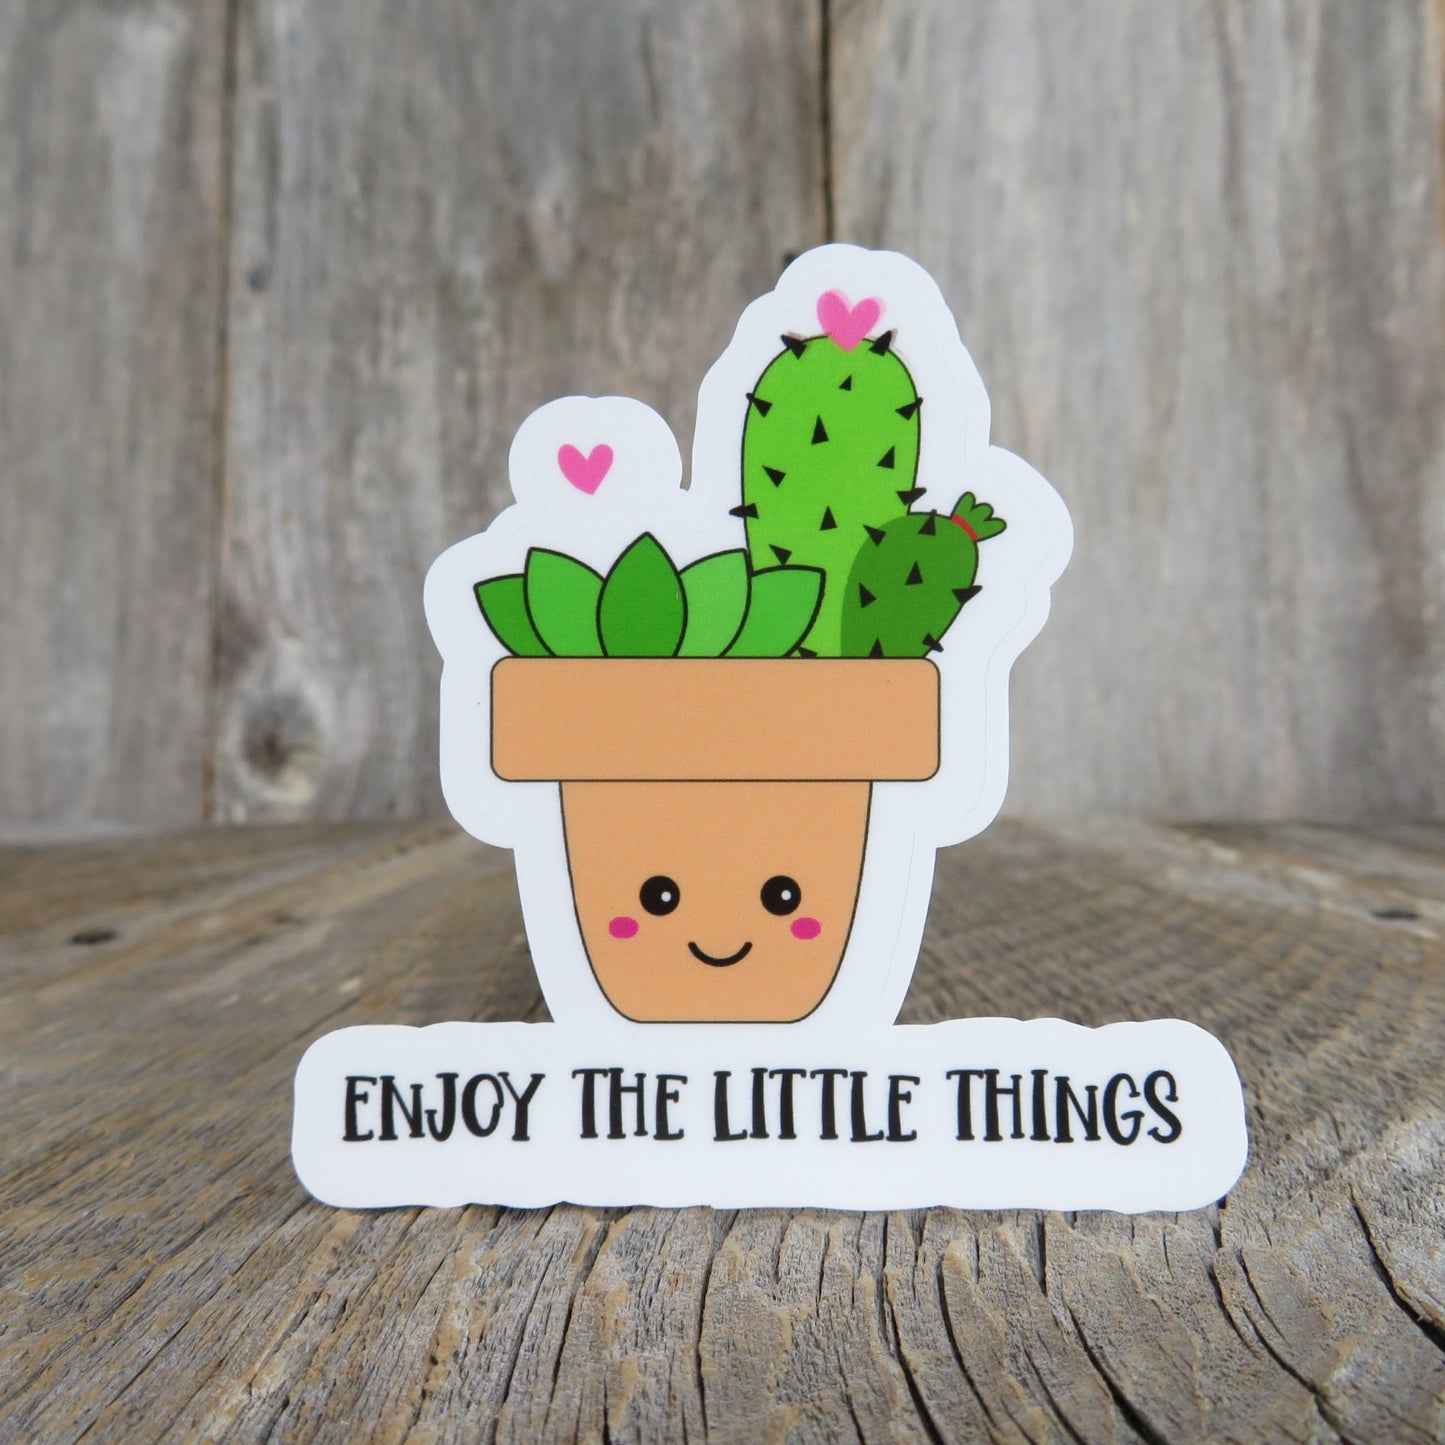 Enjoy the Little Things Sticker Full Color Kawaii Cactus In Pot Waterproof Positive Saying Plant lovers Water Bottle